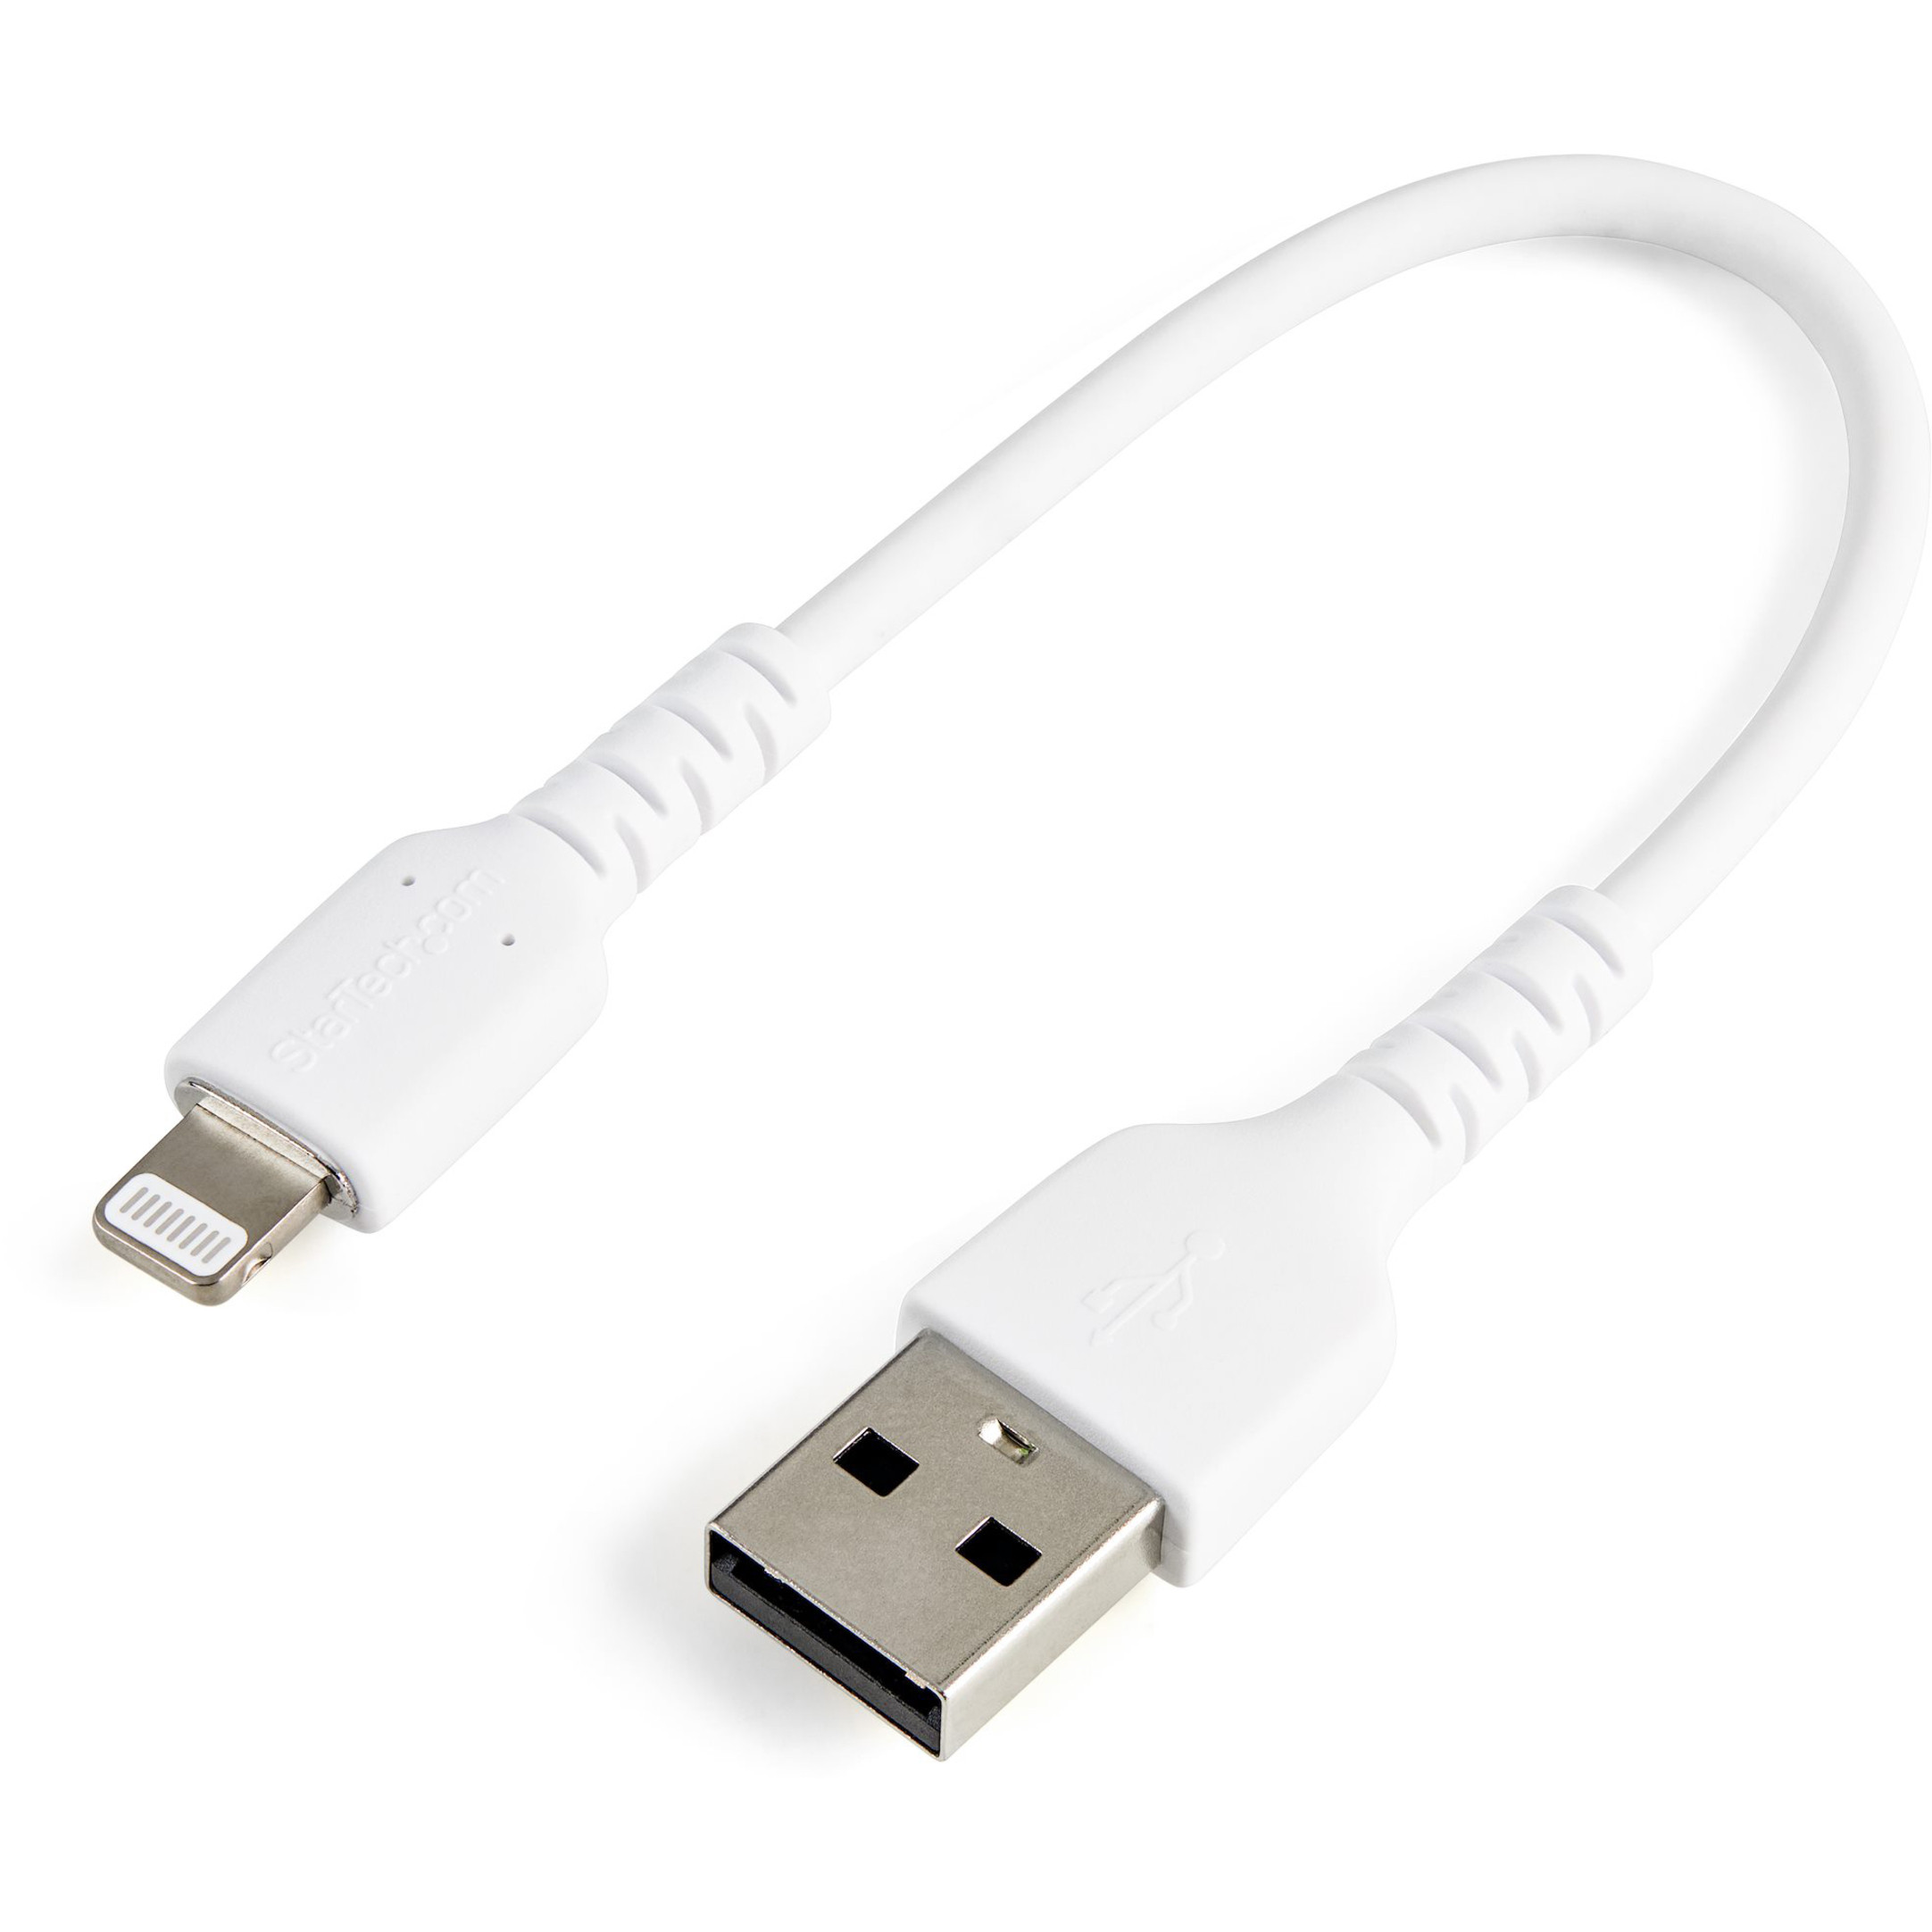 Startech .com 6 inch/15cm Durable White USB-A to Lightning Cable, Duty Charging/Sync Cable for Apple iPhone/iPad MFi Certified... - Corporate Armor